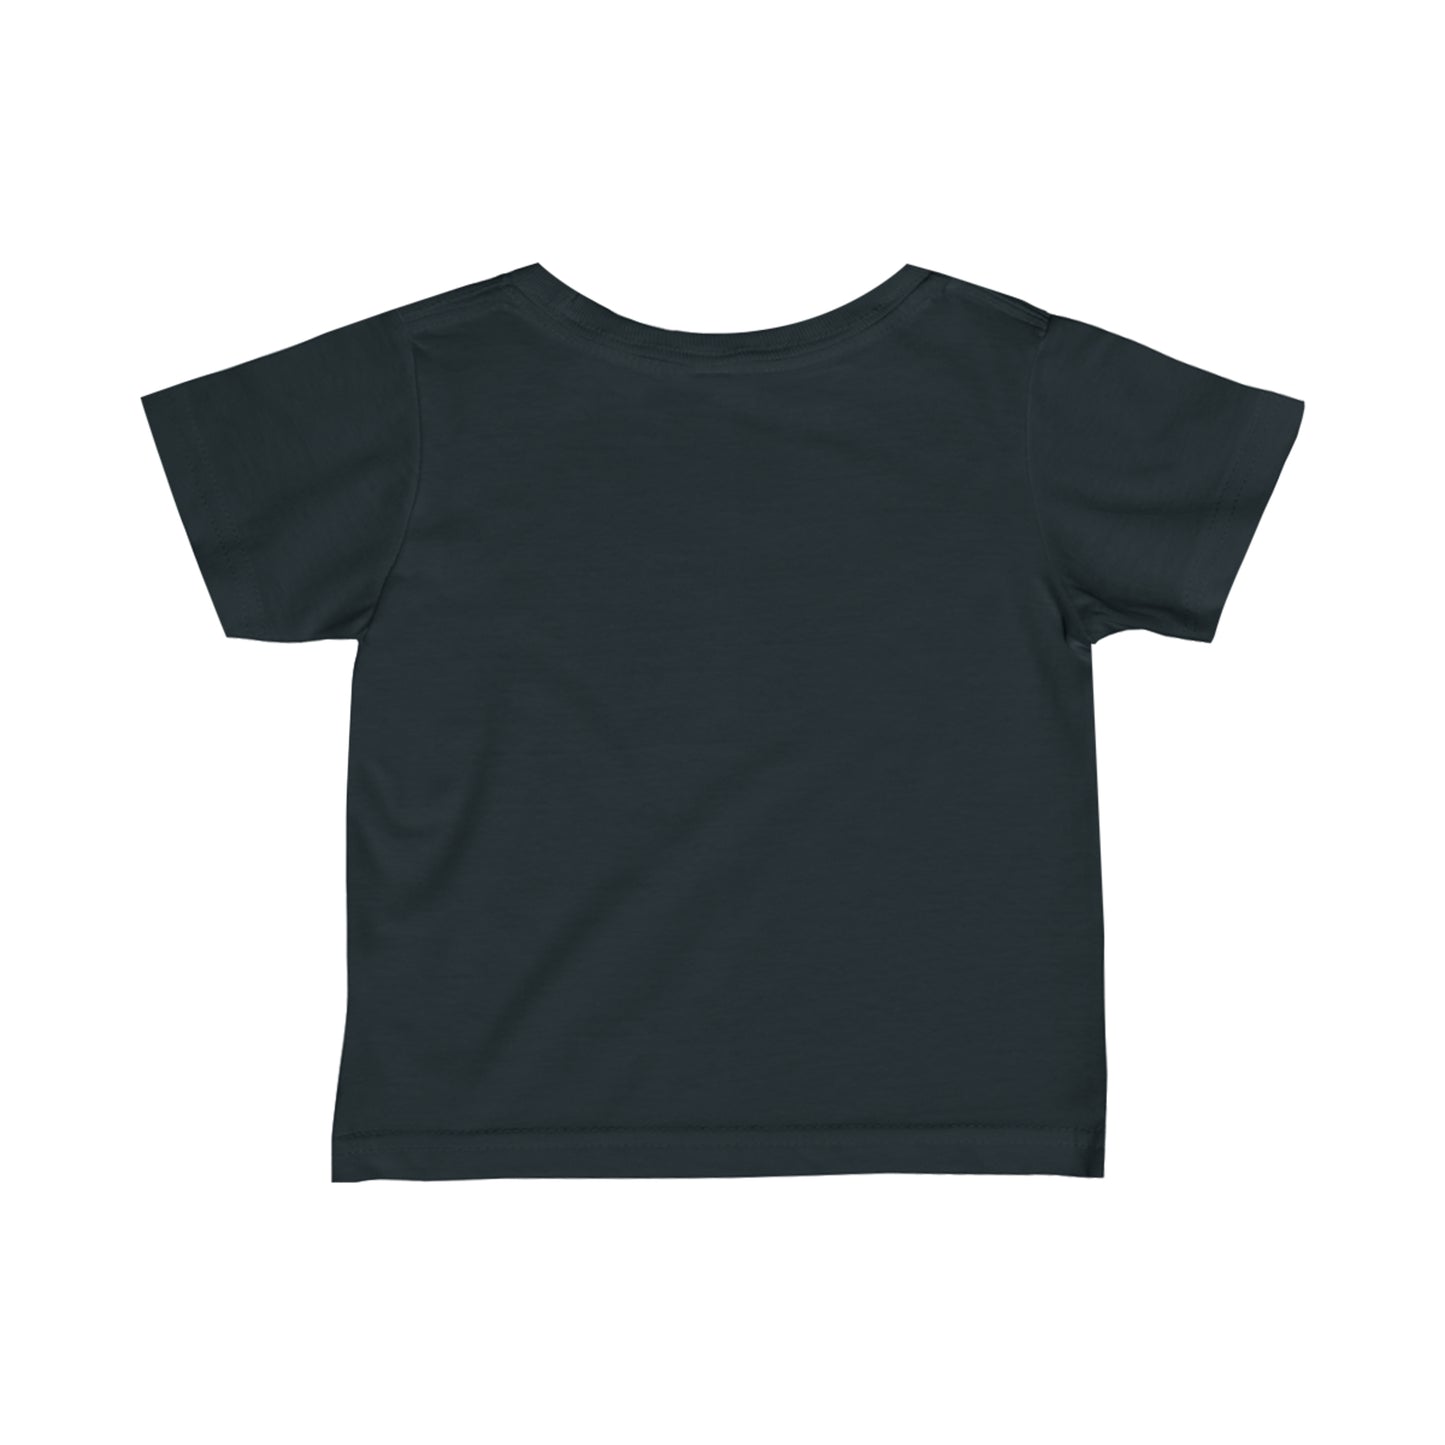 Repeating Play Infant T-Shirt